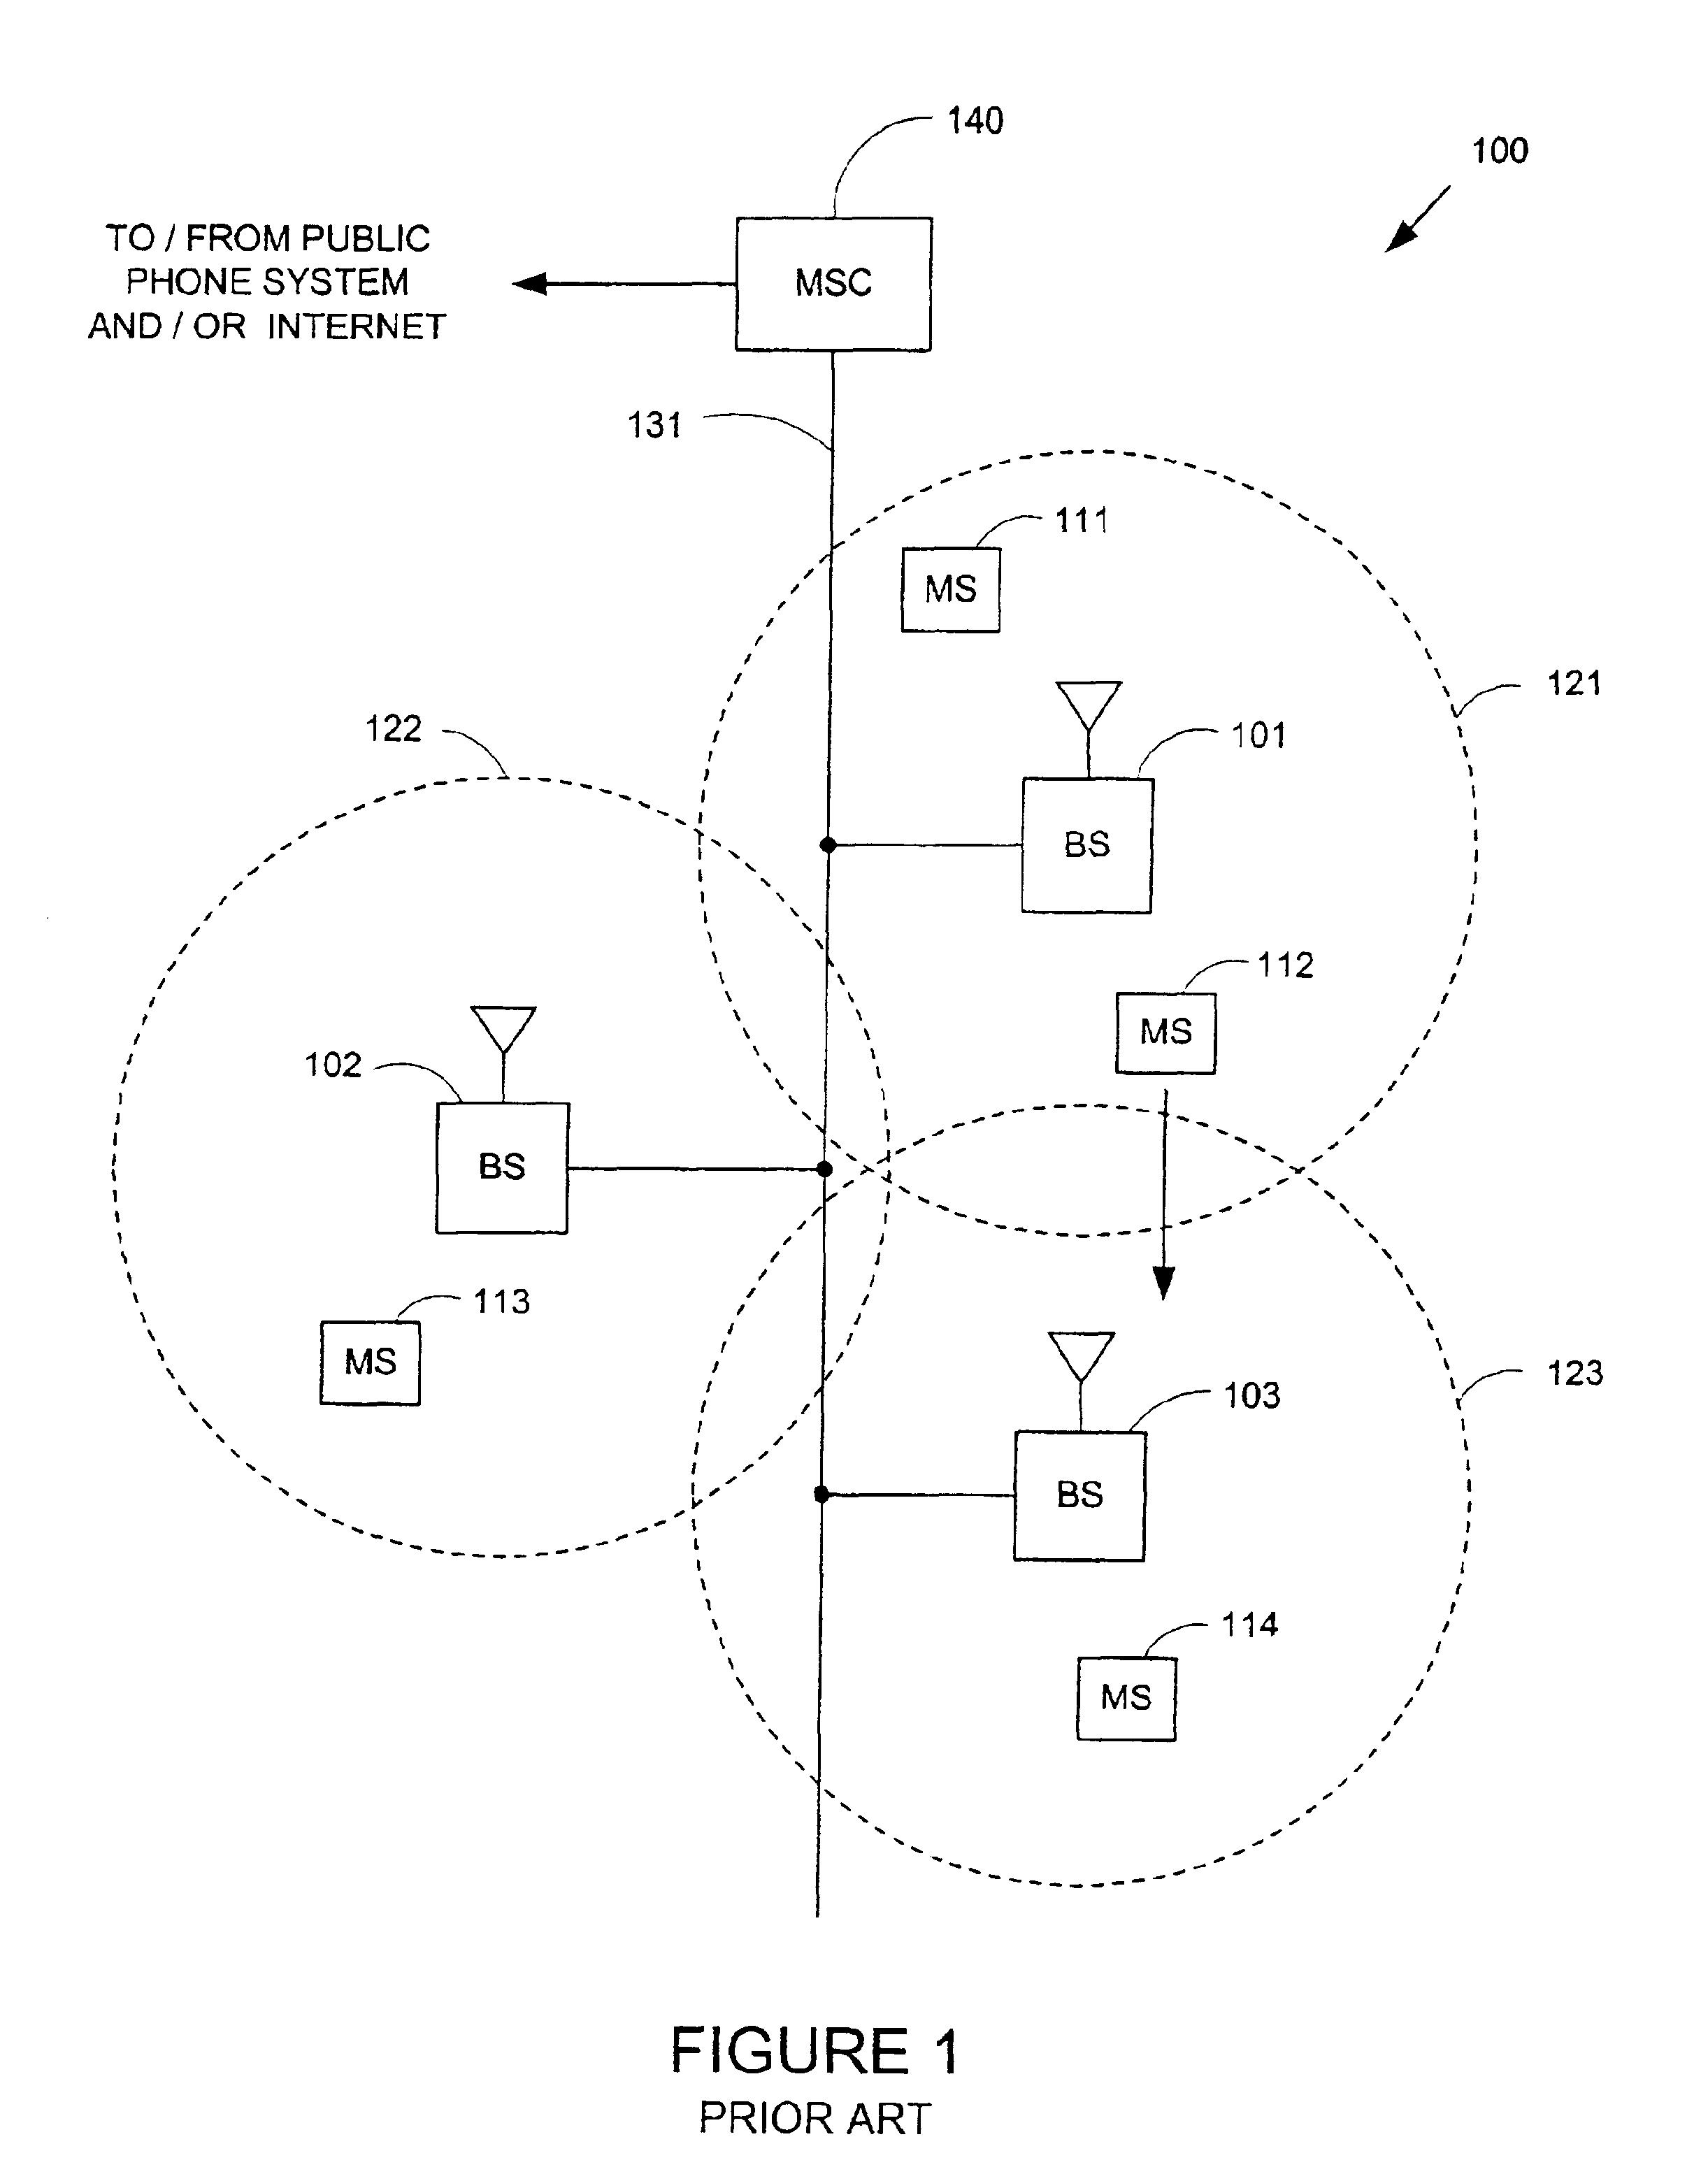 System and method for providing a distributed processing element unit in a mobile telecommunications network